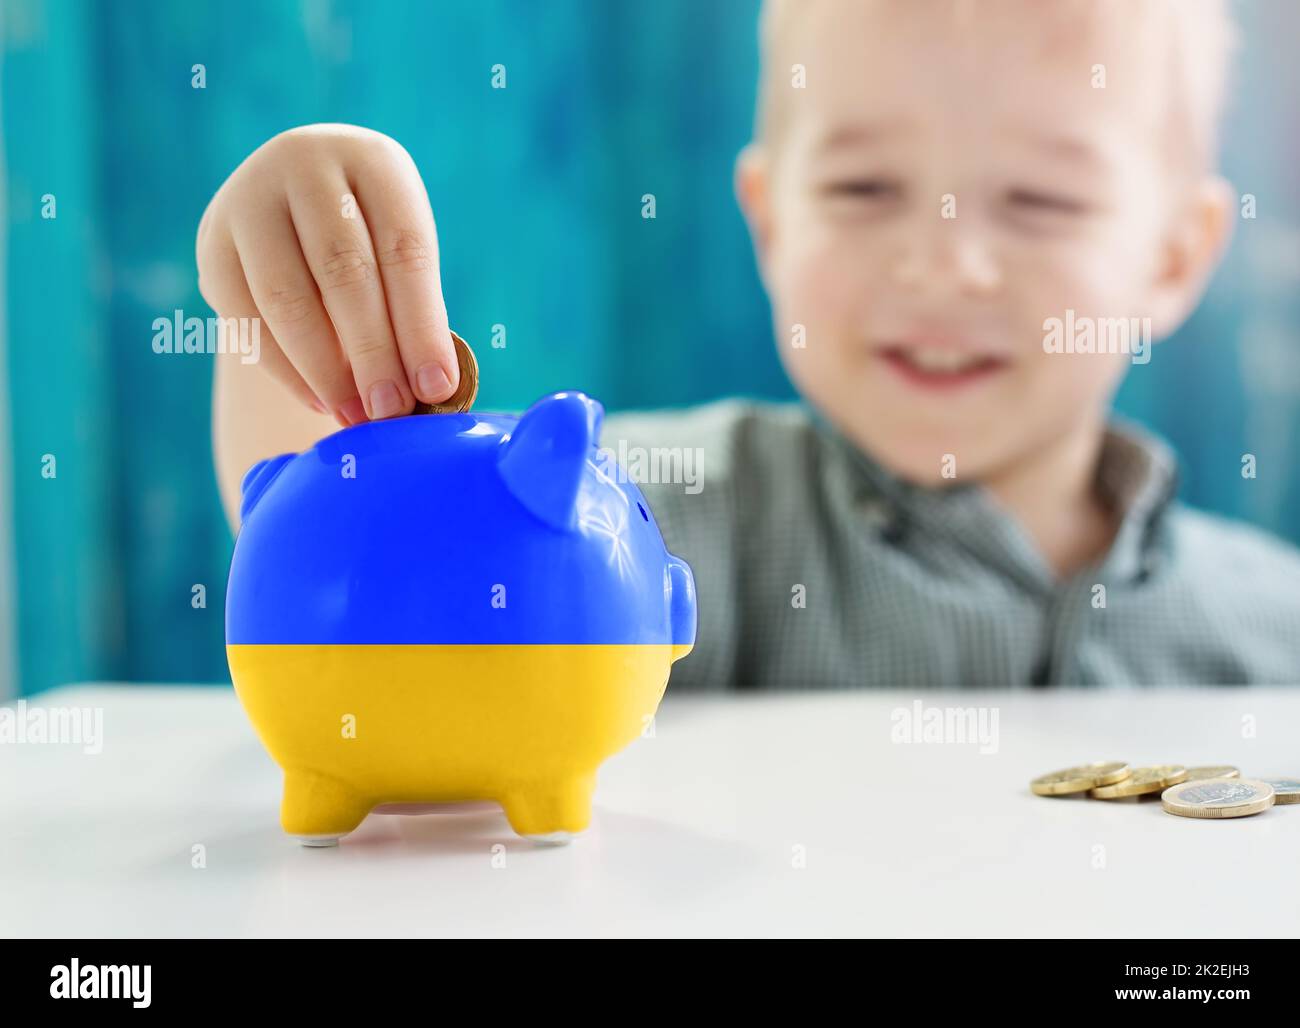 Child sitting at the table with money coins and biggybank in colour of Ukranian flag. Stock Photo